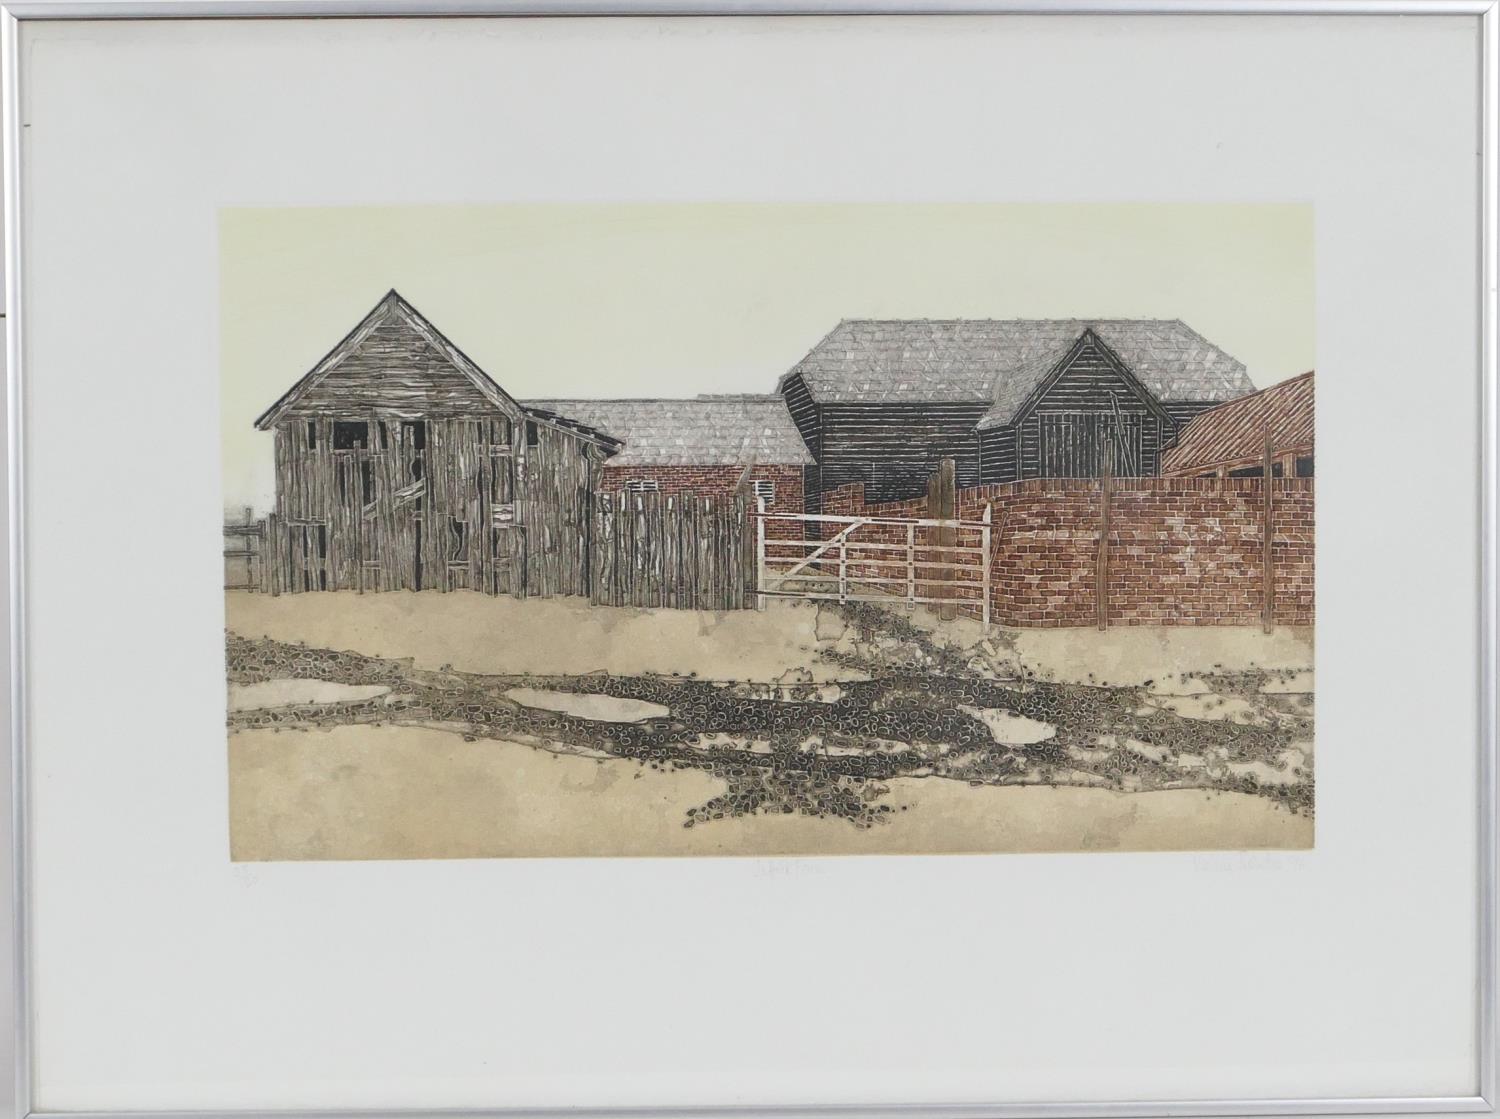 Valerie Thornton (1931-1991), Suffolk Farm, limited edition lithograph, numbered 28/150, signed in